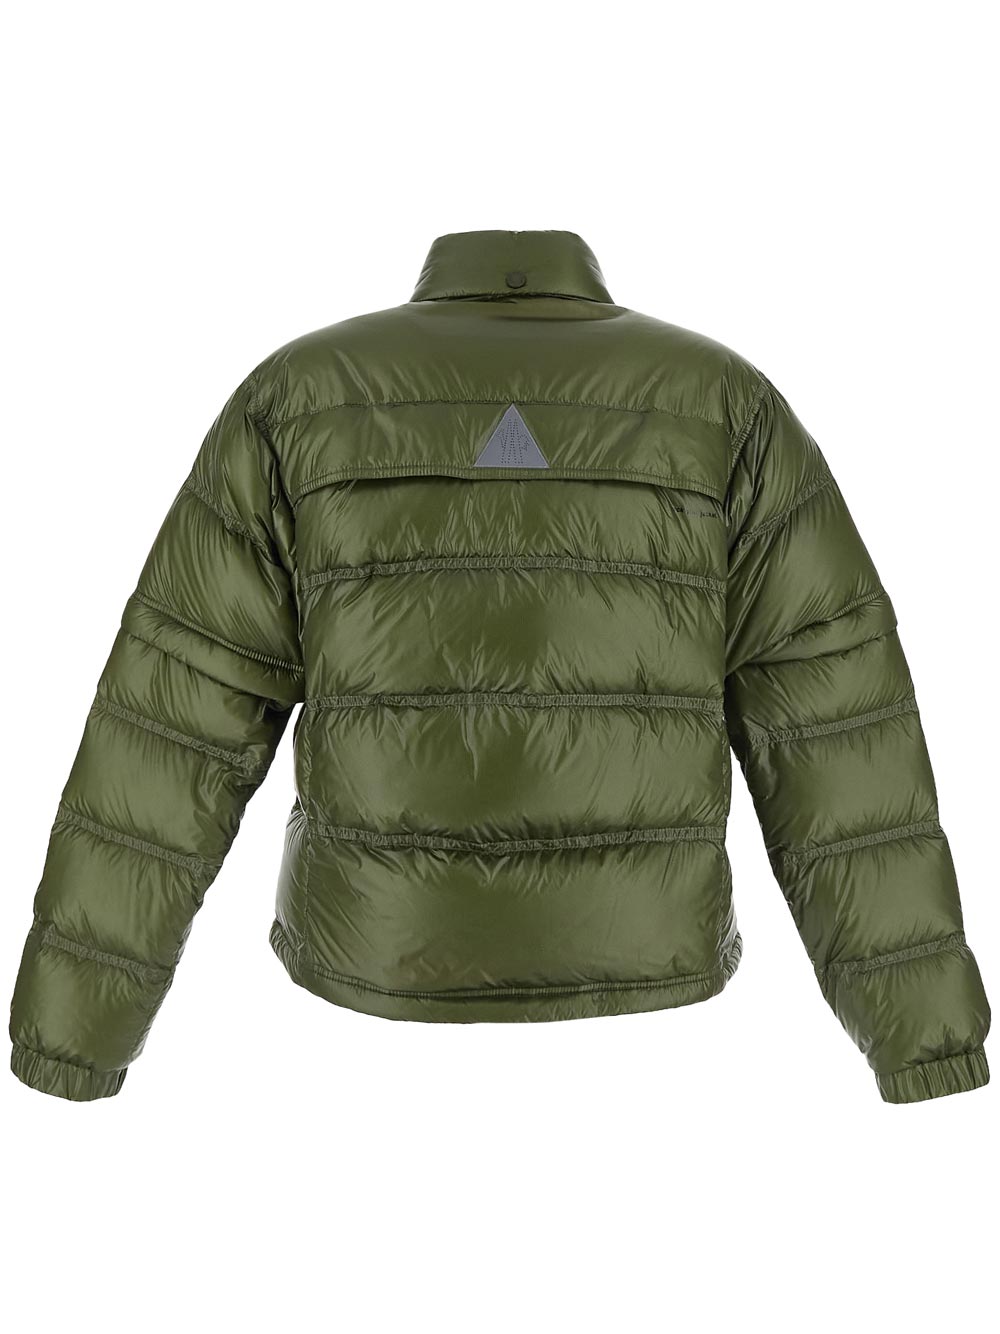 Moncler Grenoble MONCLER GRENOBLE Down Jacket green 1A00008539YL817